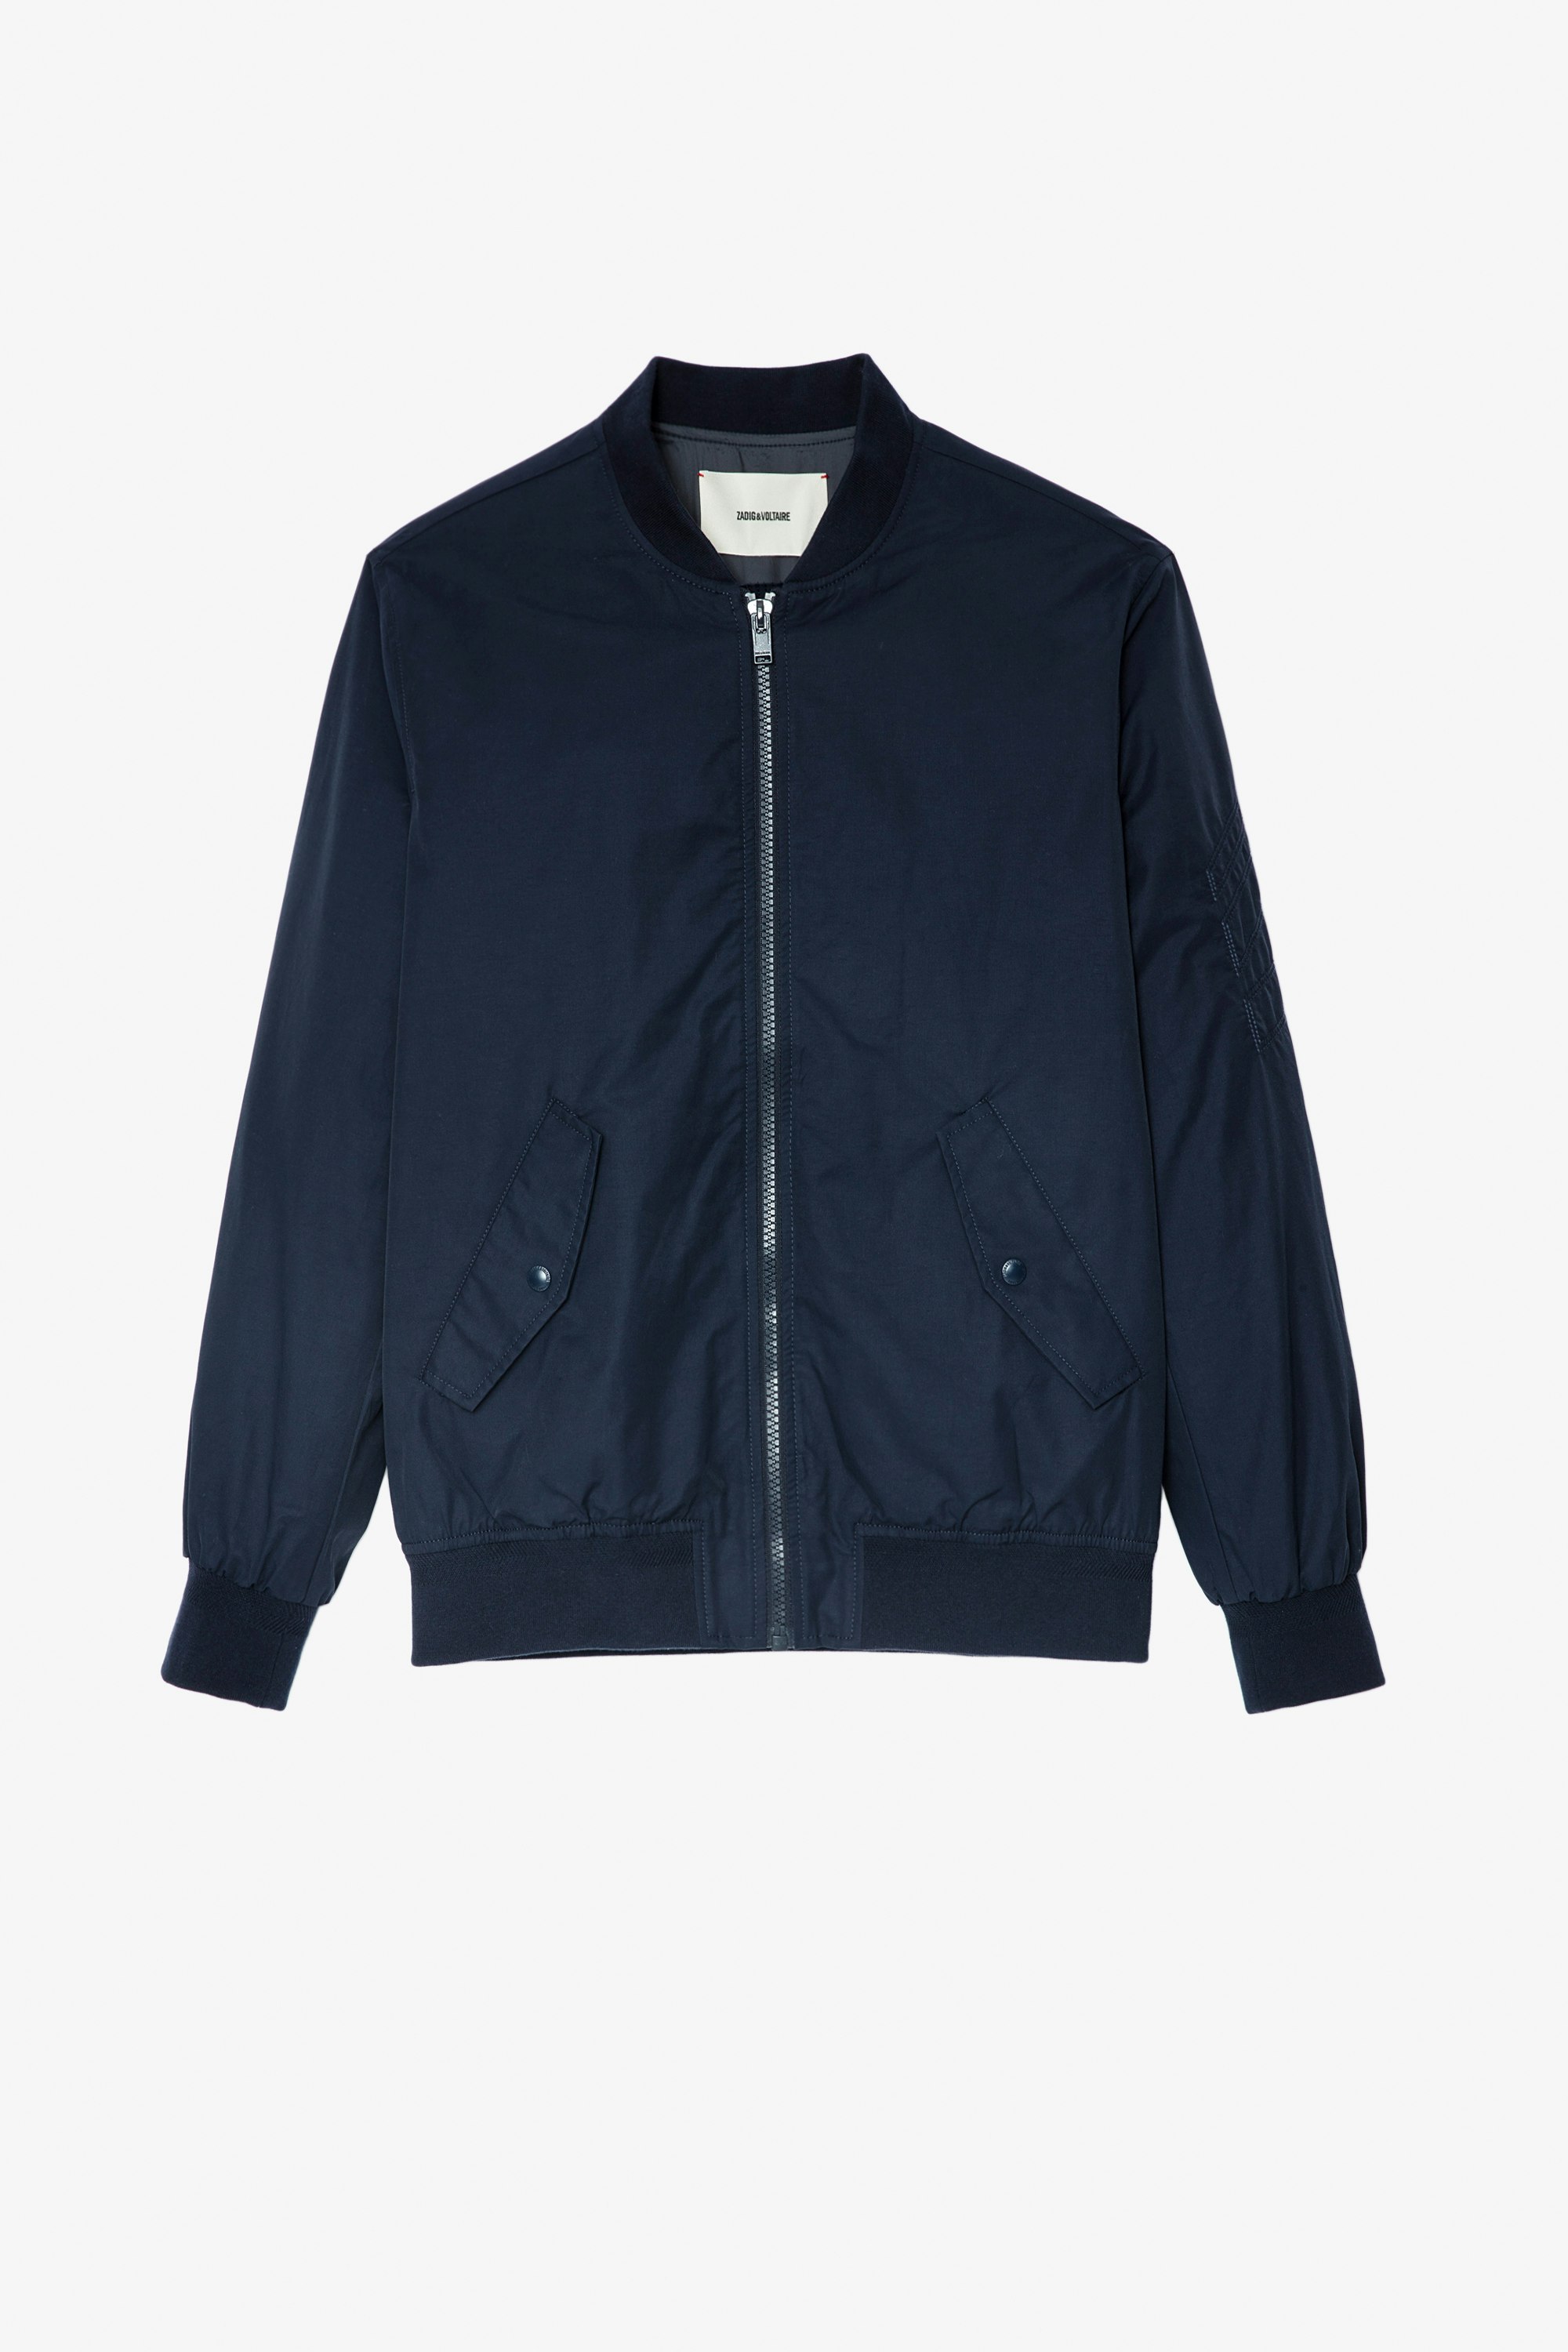 Mate Bomber Jacket Men's navy-blue bomber jacket with arrows on the left sleeve